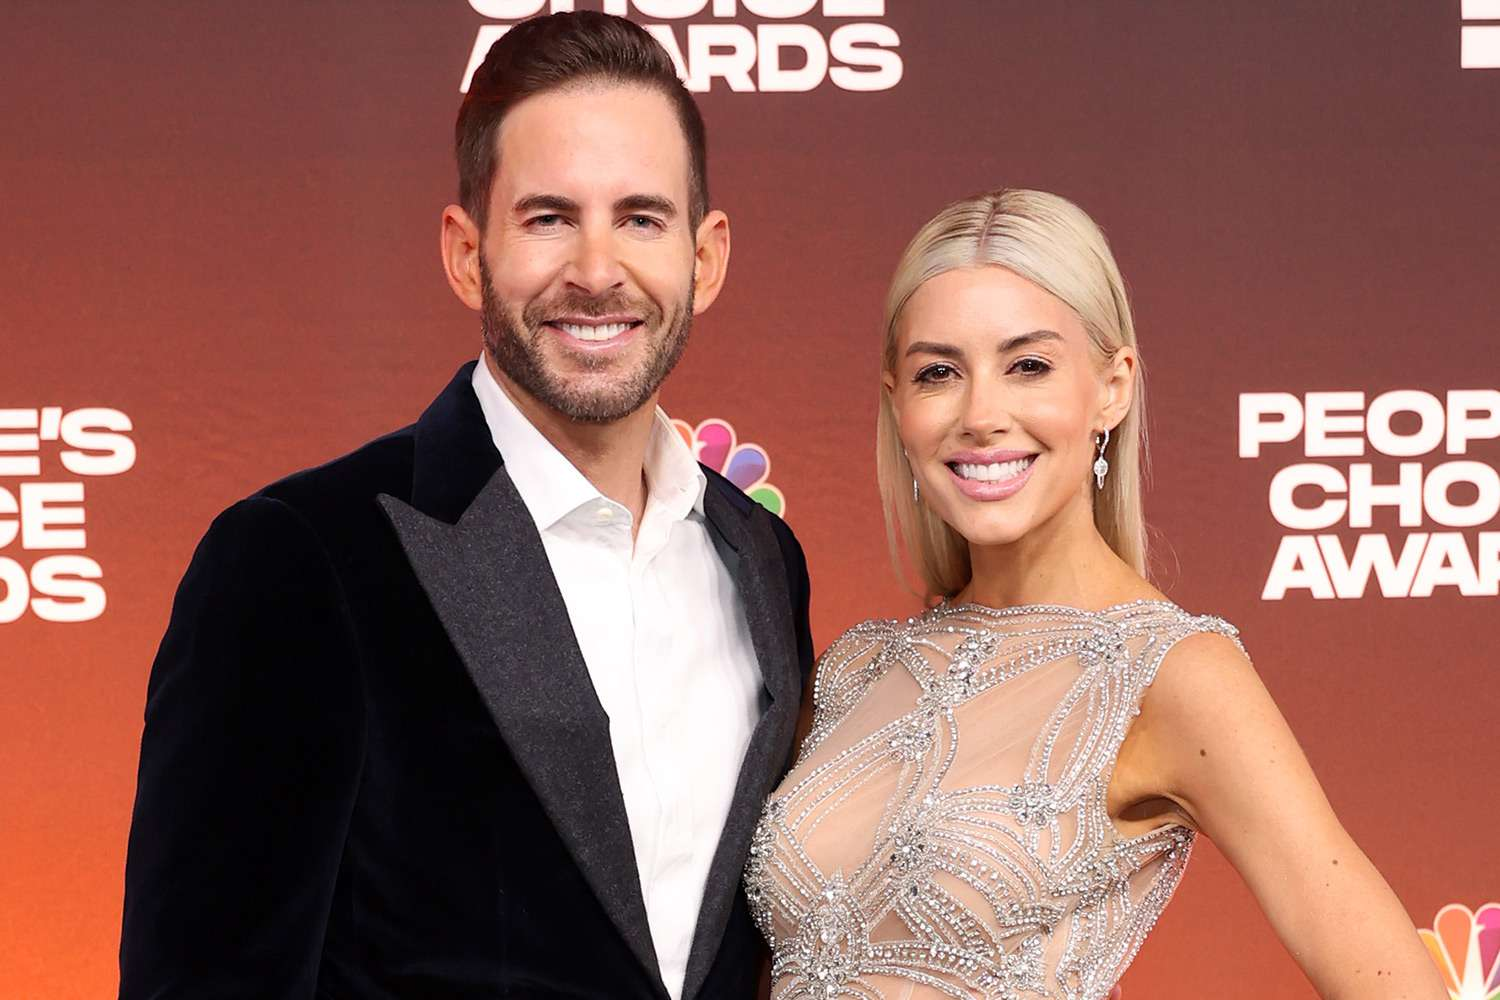 Tarek El Moussa's Wife Heather Rae El Moussa Biography: Net Worth, Spouse, Age, Wiki, Children, Height, Movies and TV Shows